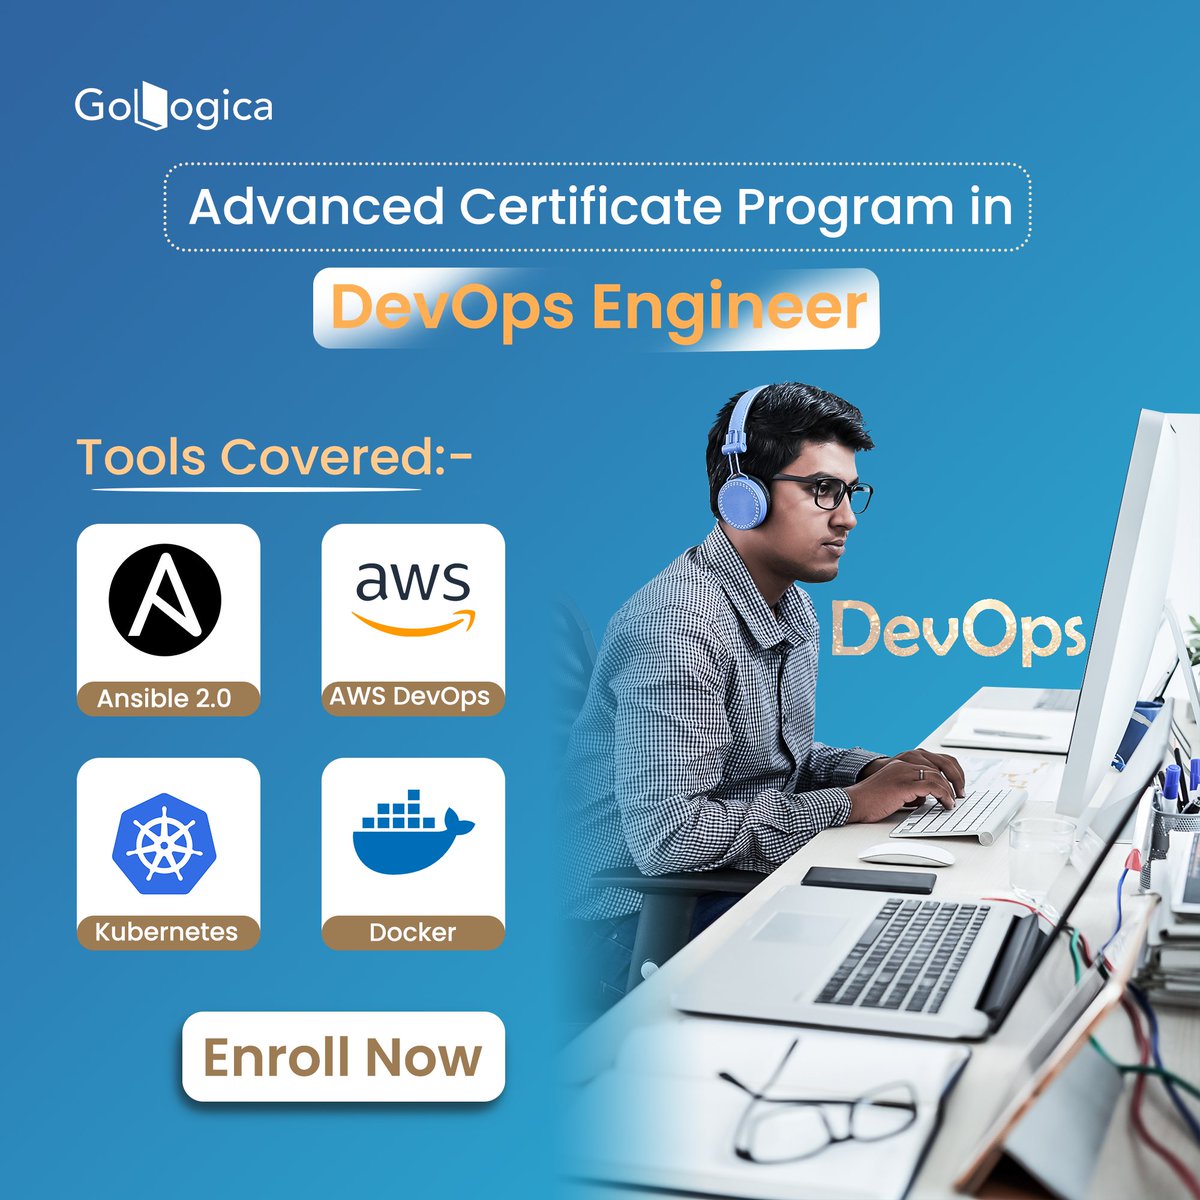 Elevate your career with our Advanced DevOps Engineer Certification Program at GoLogica! 
#DevOpsEngineer #GoLogica  #DevOpsSkills #DevOpsTraining #DevOpsCertification #DevOpsCareer #Ansible #Automation #ConfigurationManagement #InfrastructureAsCode #AnsiblePlaybook